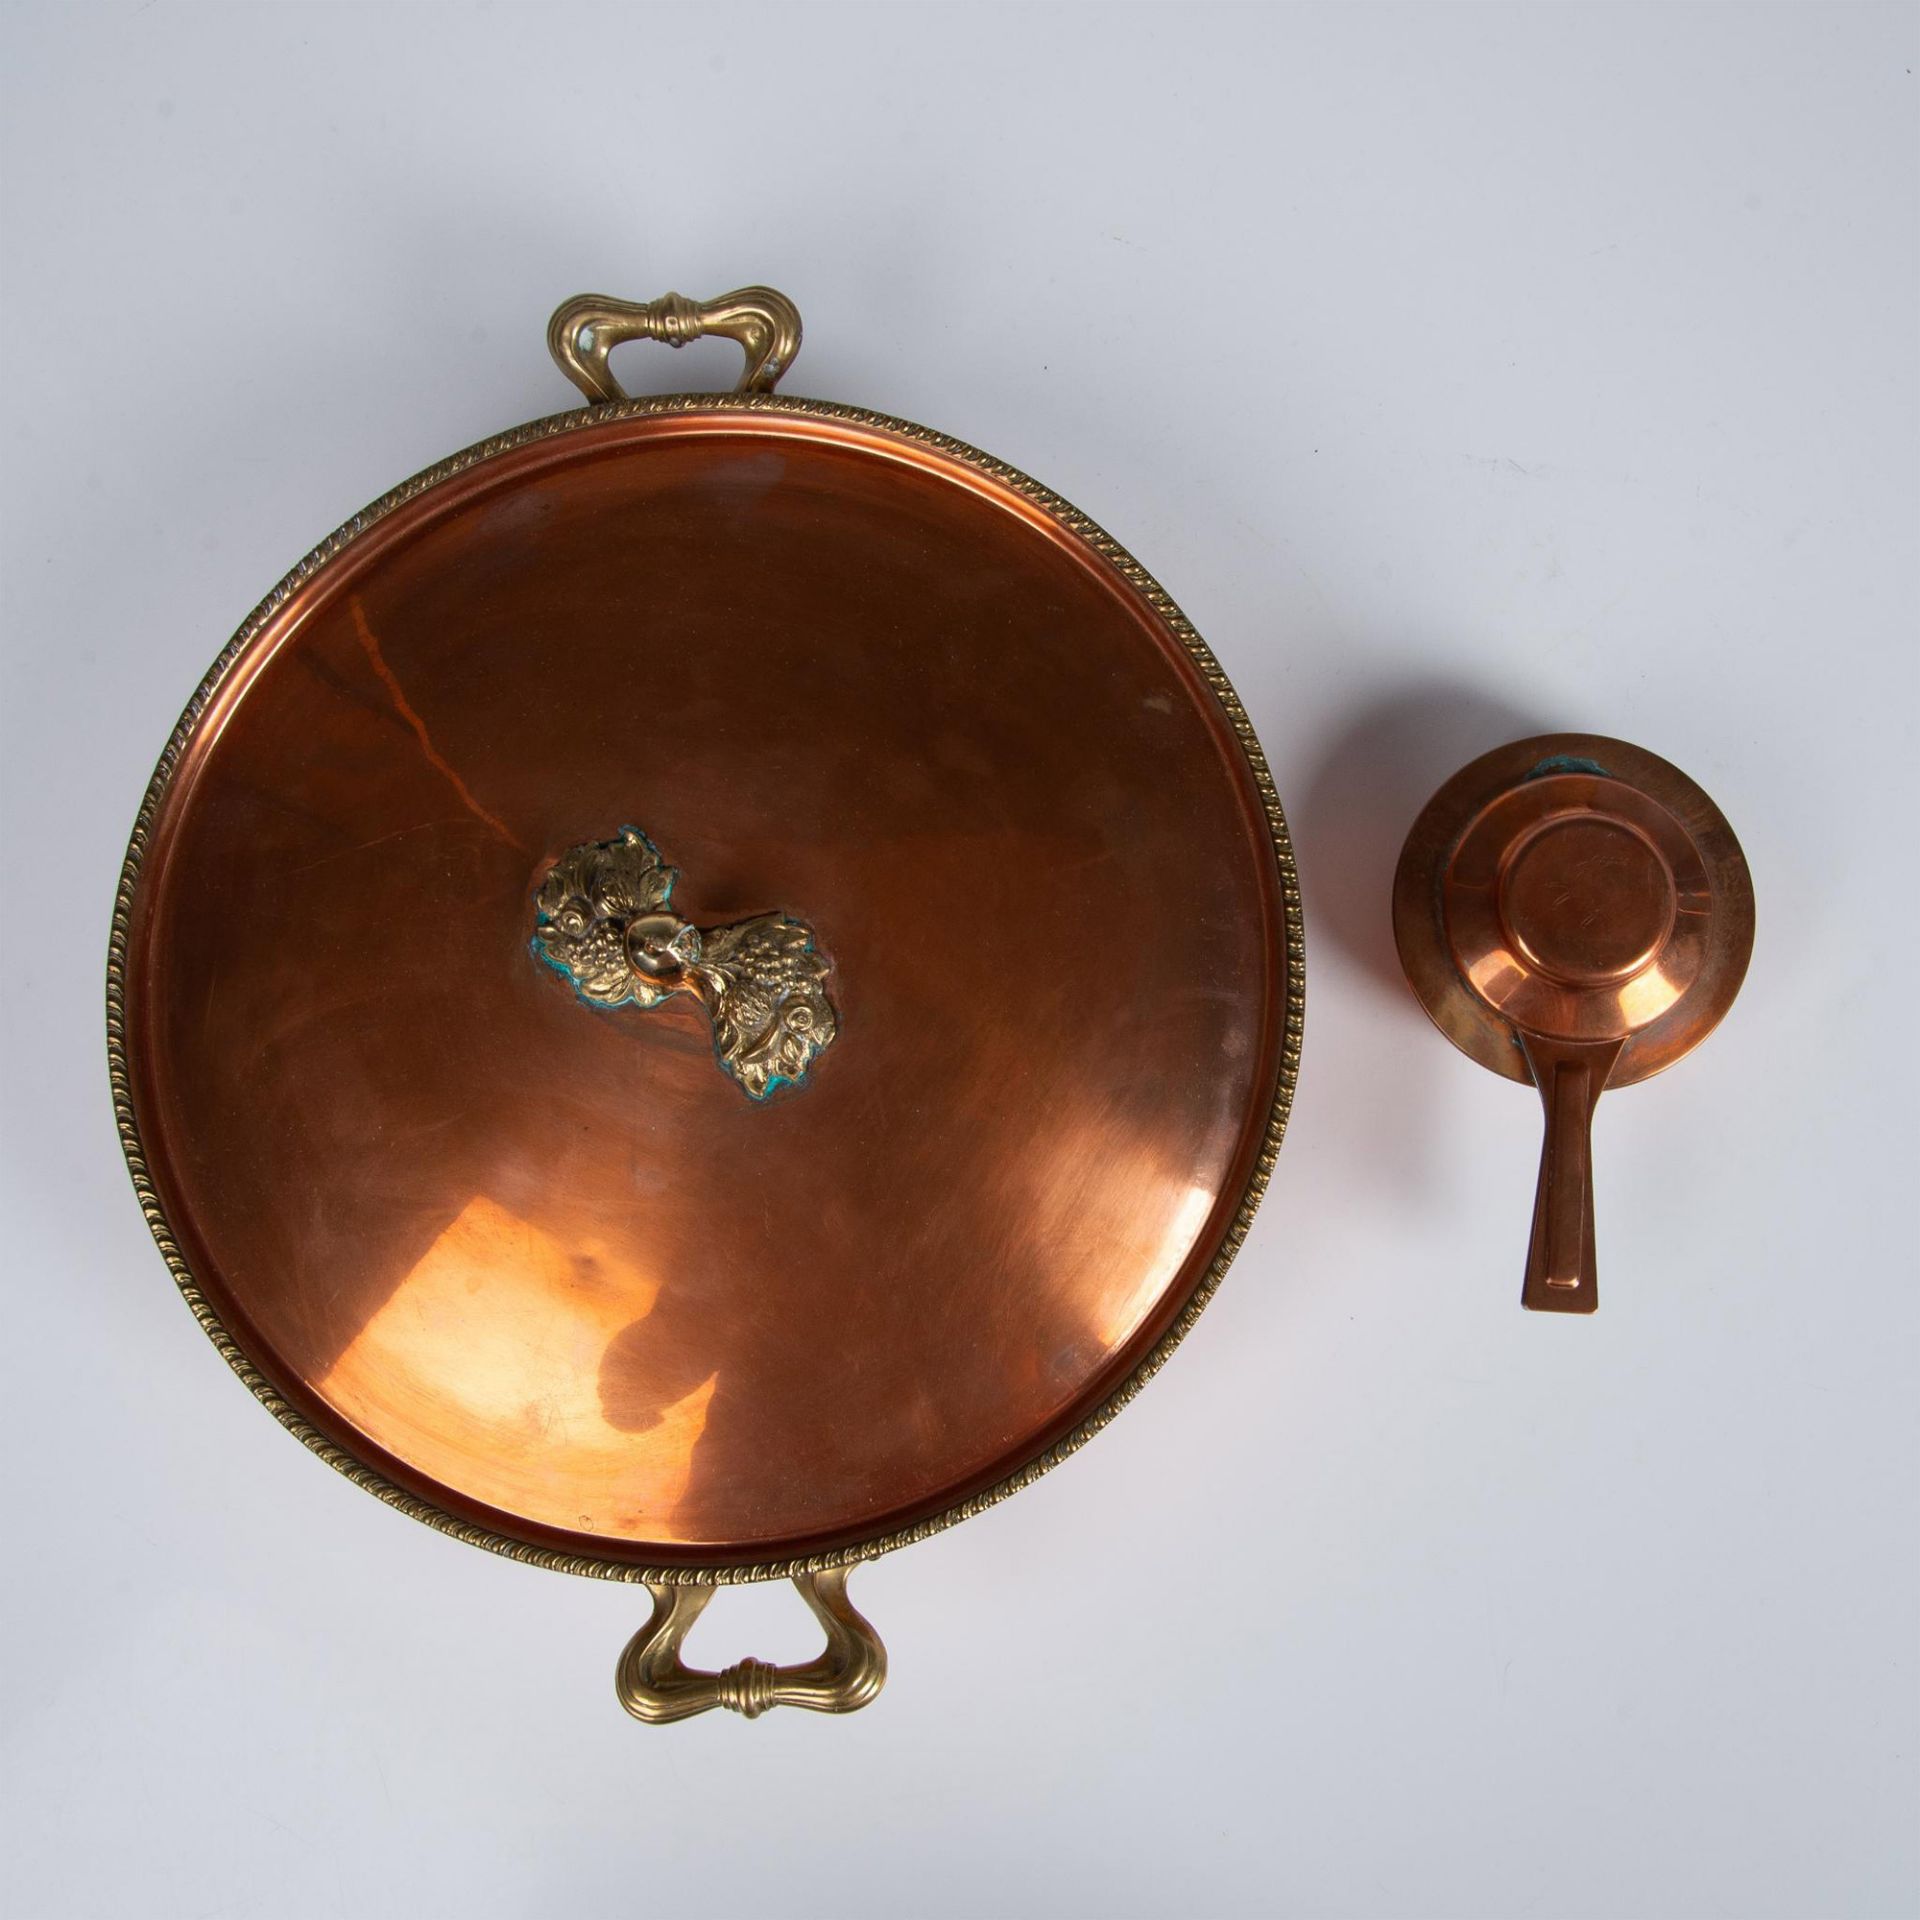 3pc Copper Cookware, Bongusto Braiser and Swiss Burner - Image 8 of 8